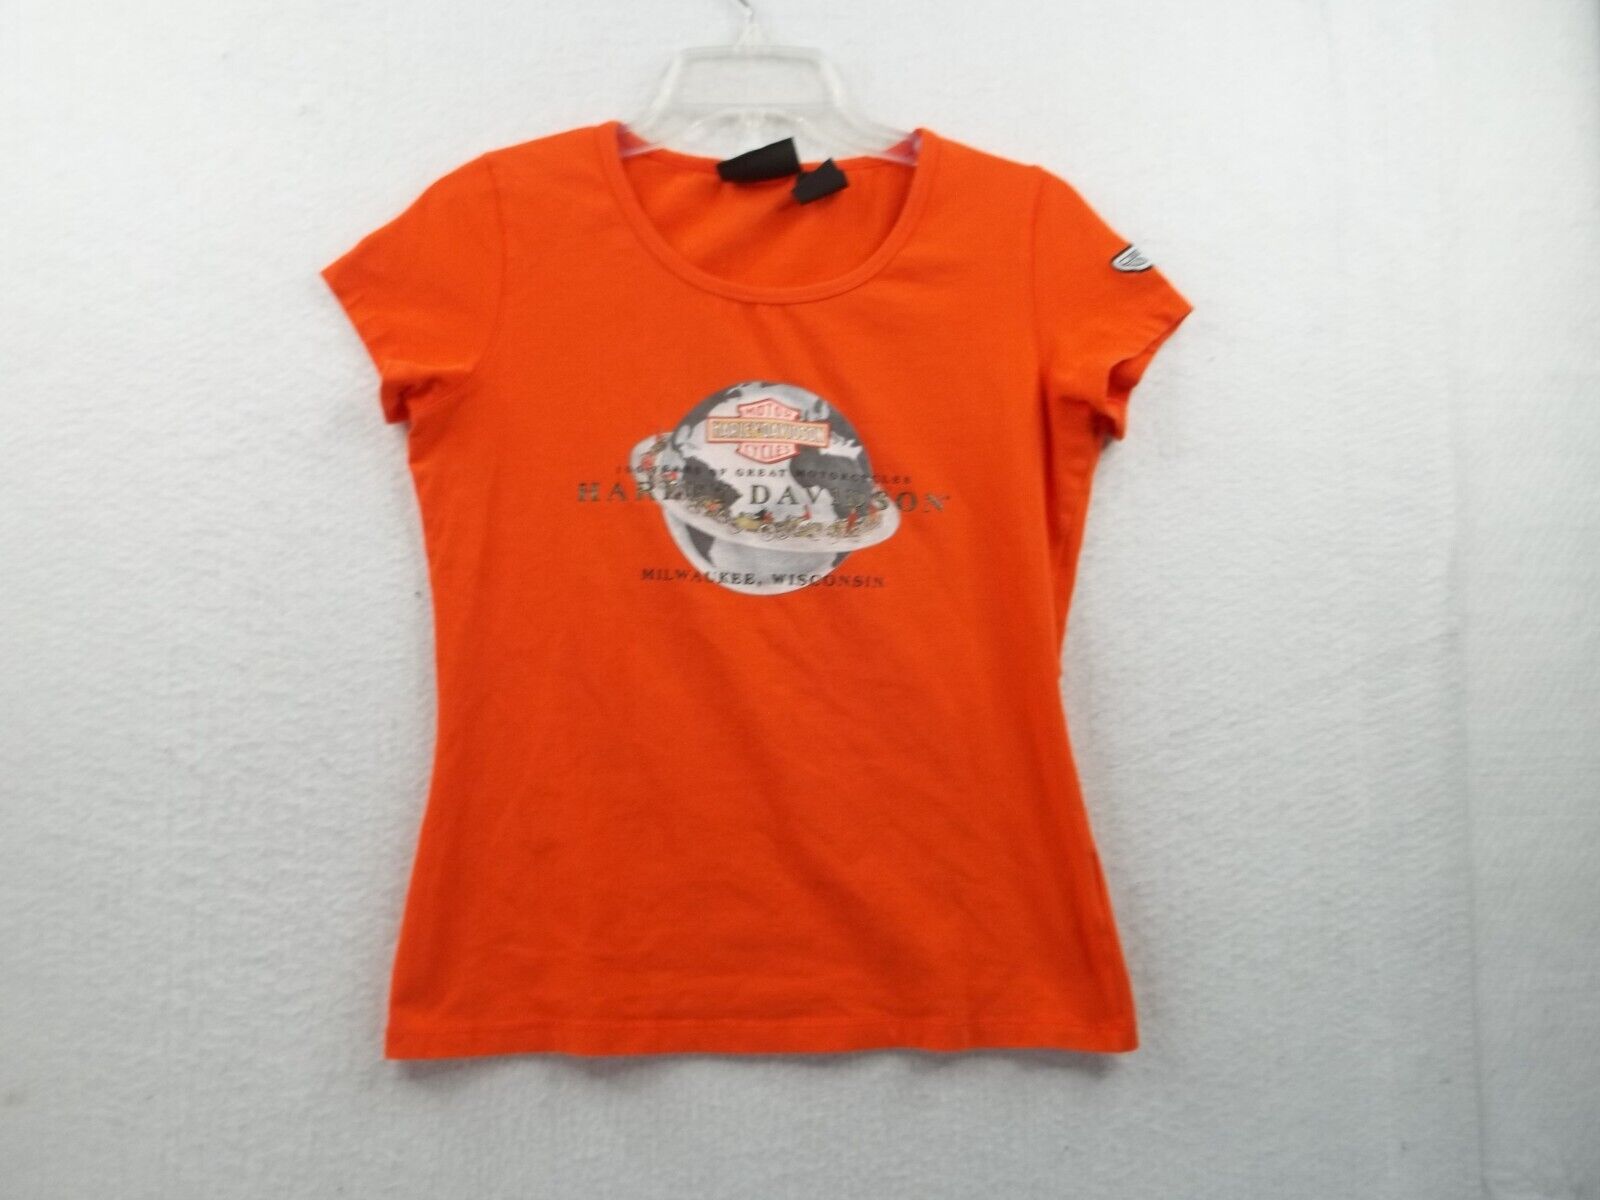 Harley Davidson Womens Orange T Shirt Size Small 100 Years of Great Motorcycles